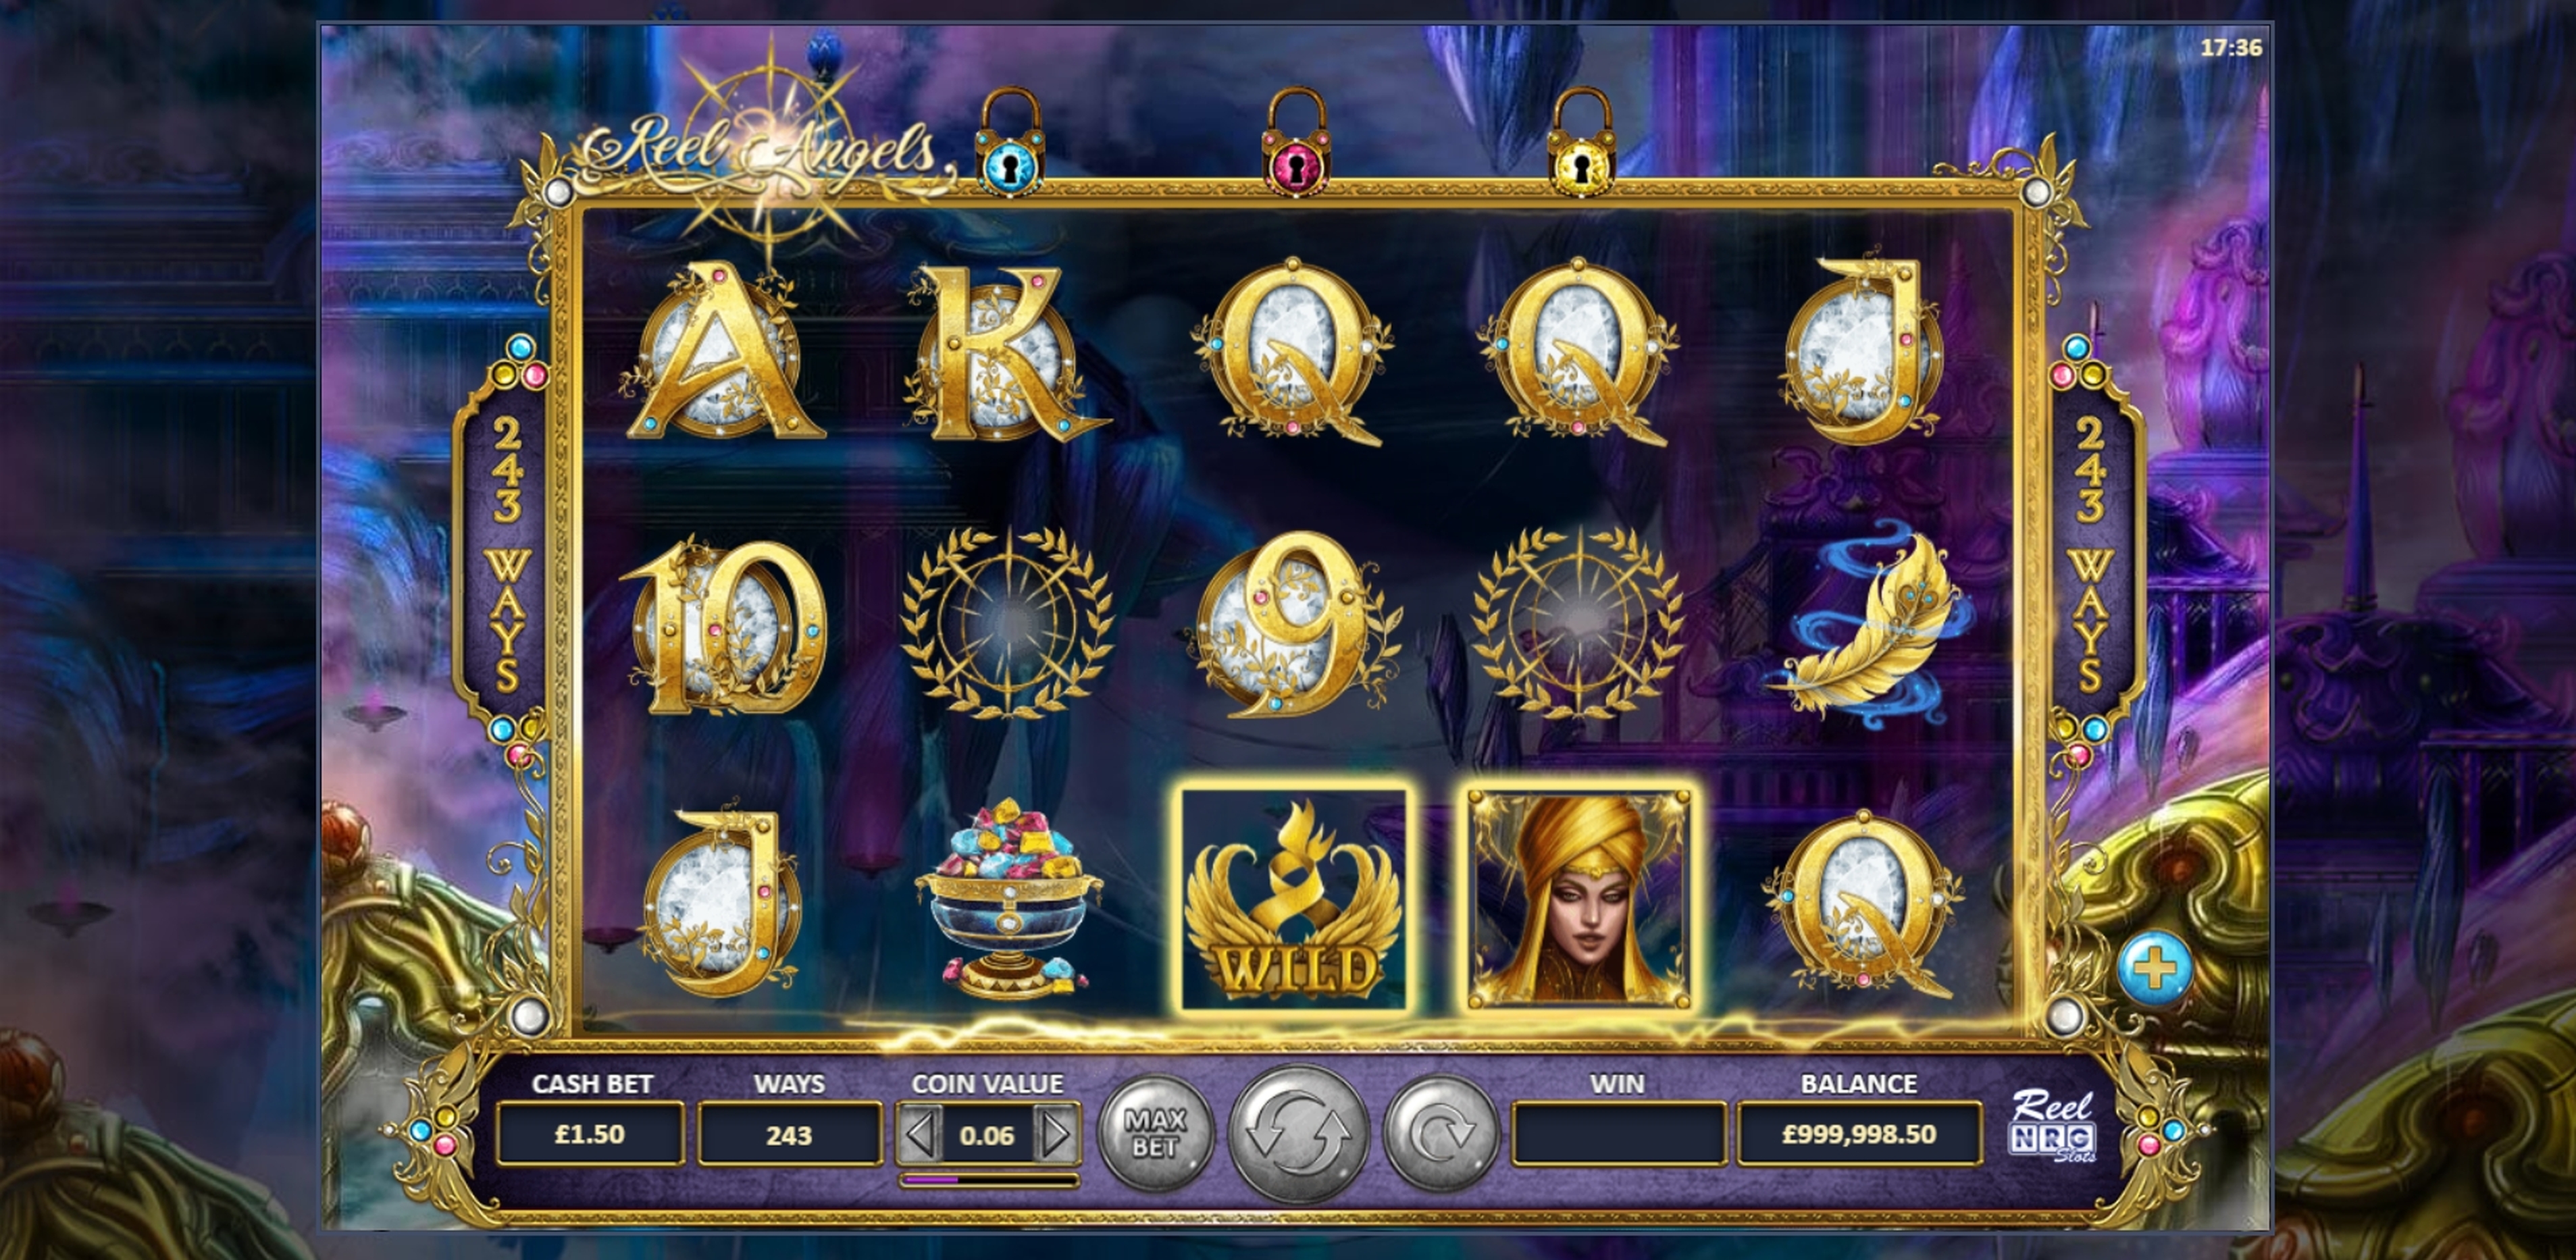 Win Money in Reel Angels Free Slot Game by ReelNRG Gaming